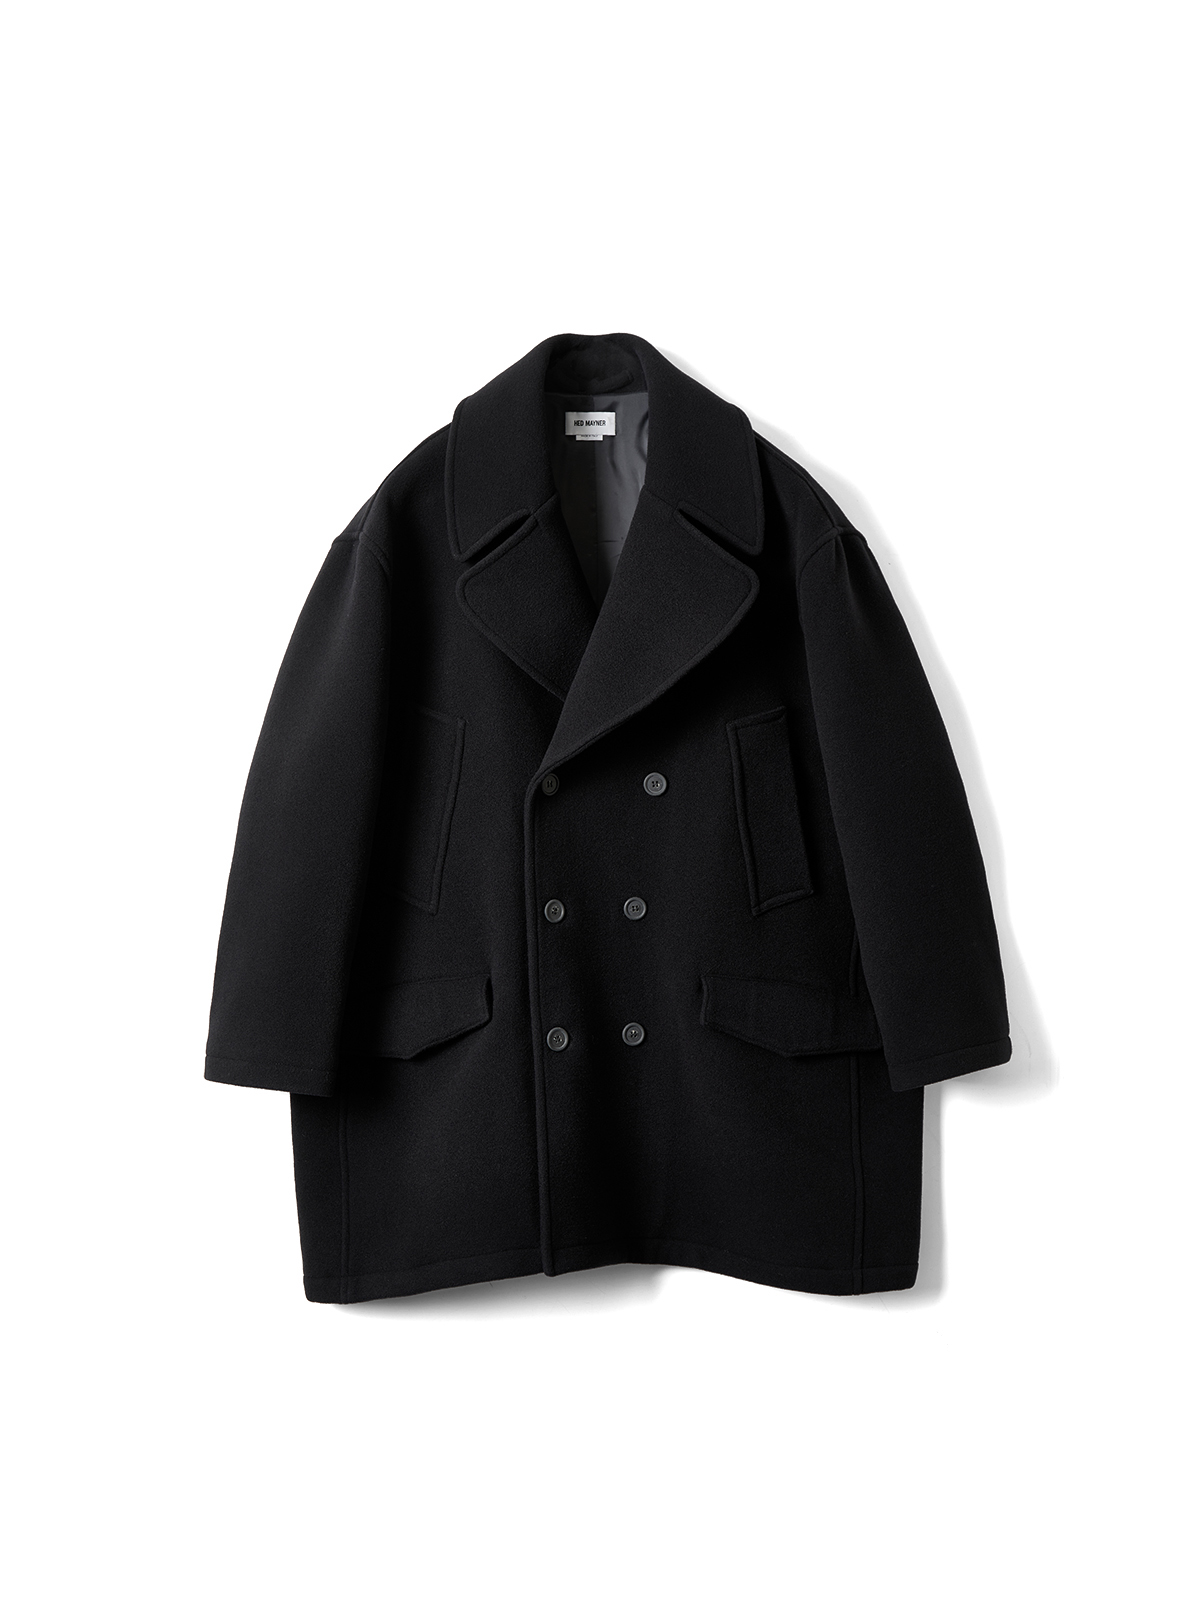 DOUBLE BREASTED PEACOAT (DARK BLUE)